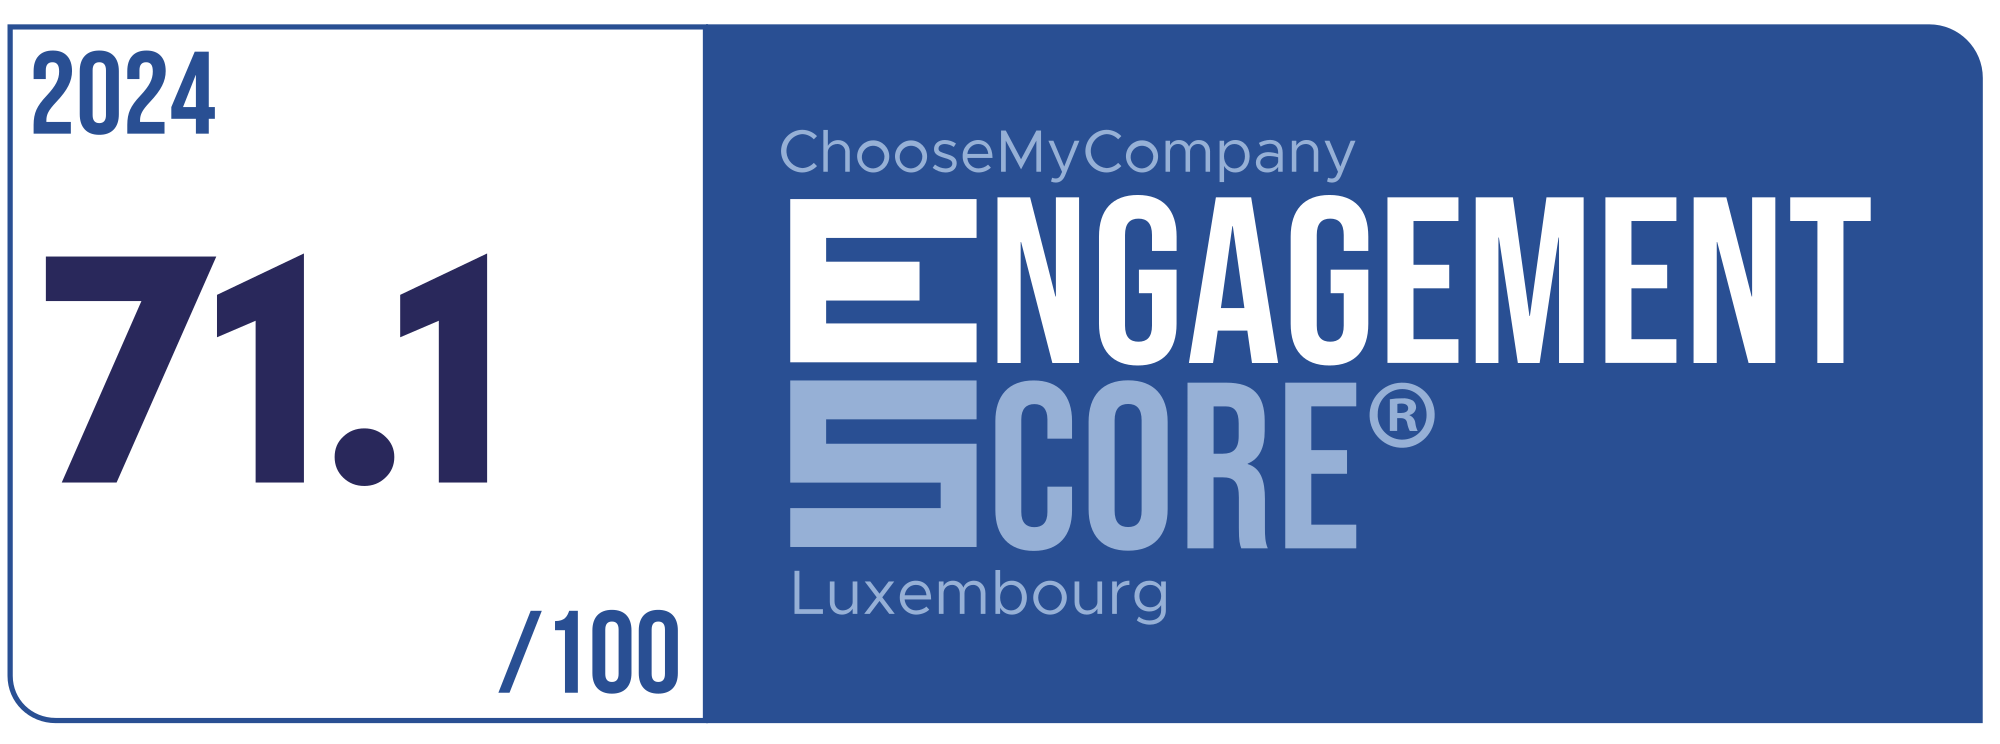 Label Engagement Score 2024 Luxembourg